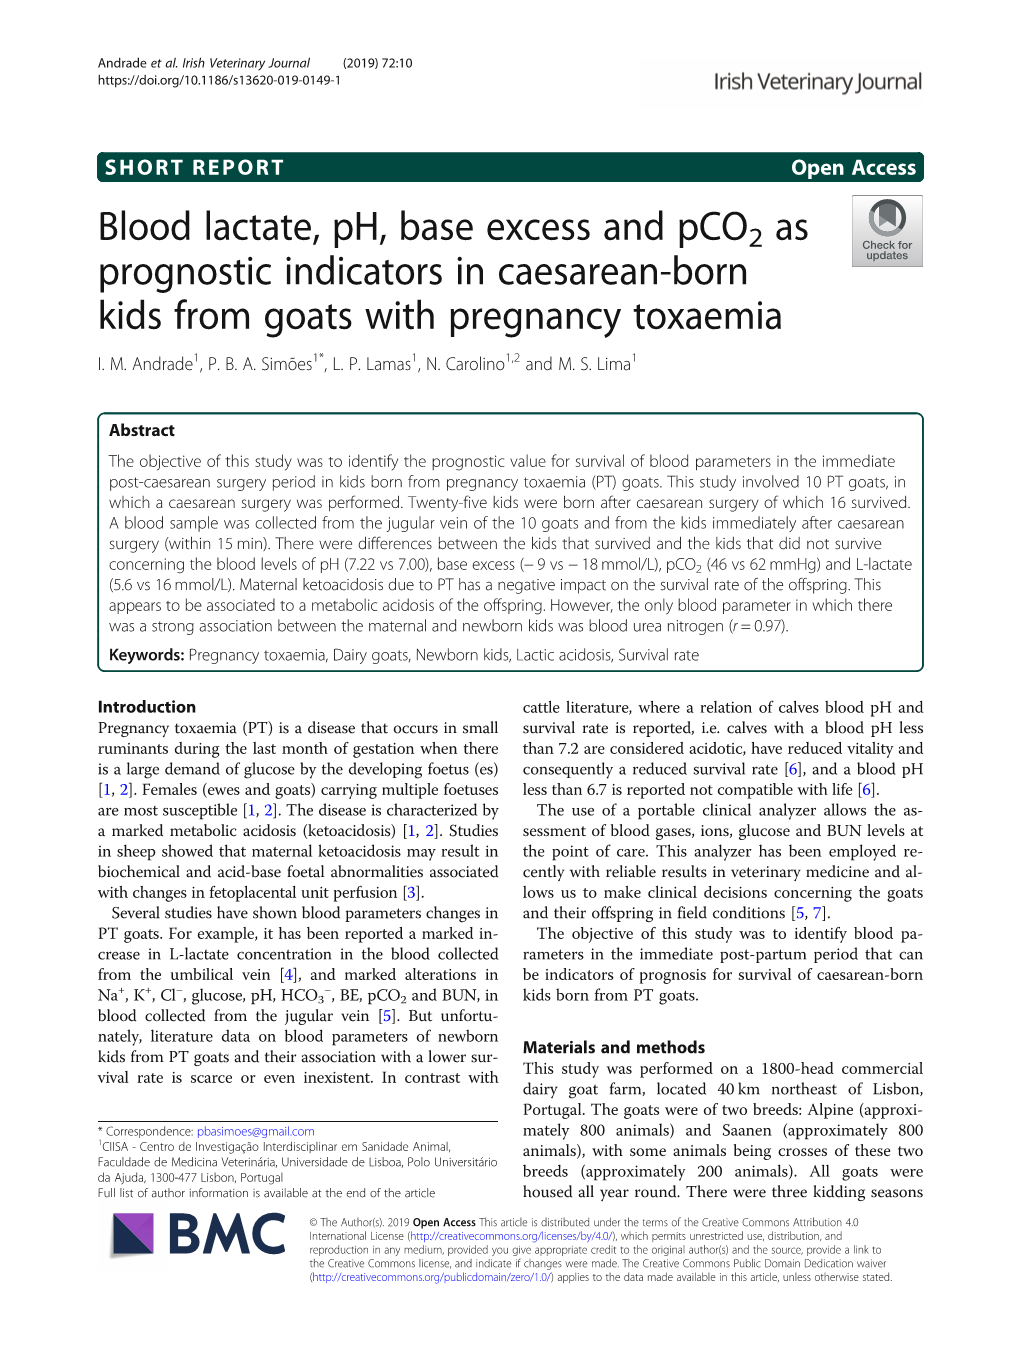 Blood Lactate, Ph, Base Excess and Pco2 As Prognostic Indicators in Caesarean-Born Kids from Goats with Pregnancy Toxaemia I